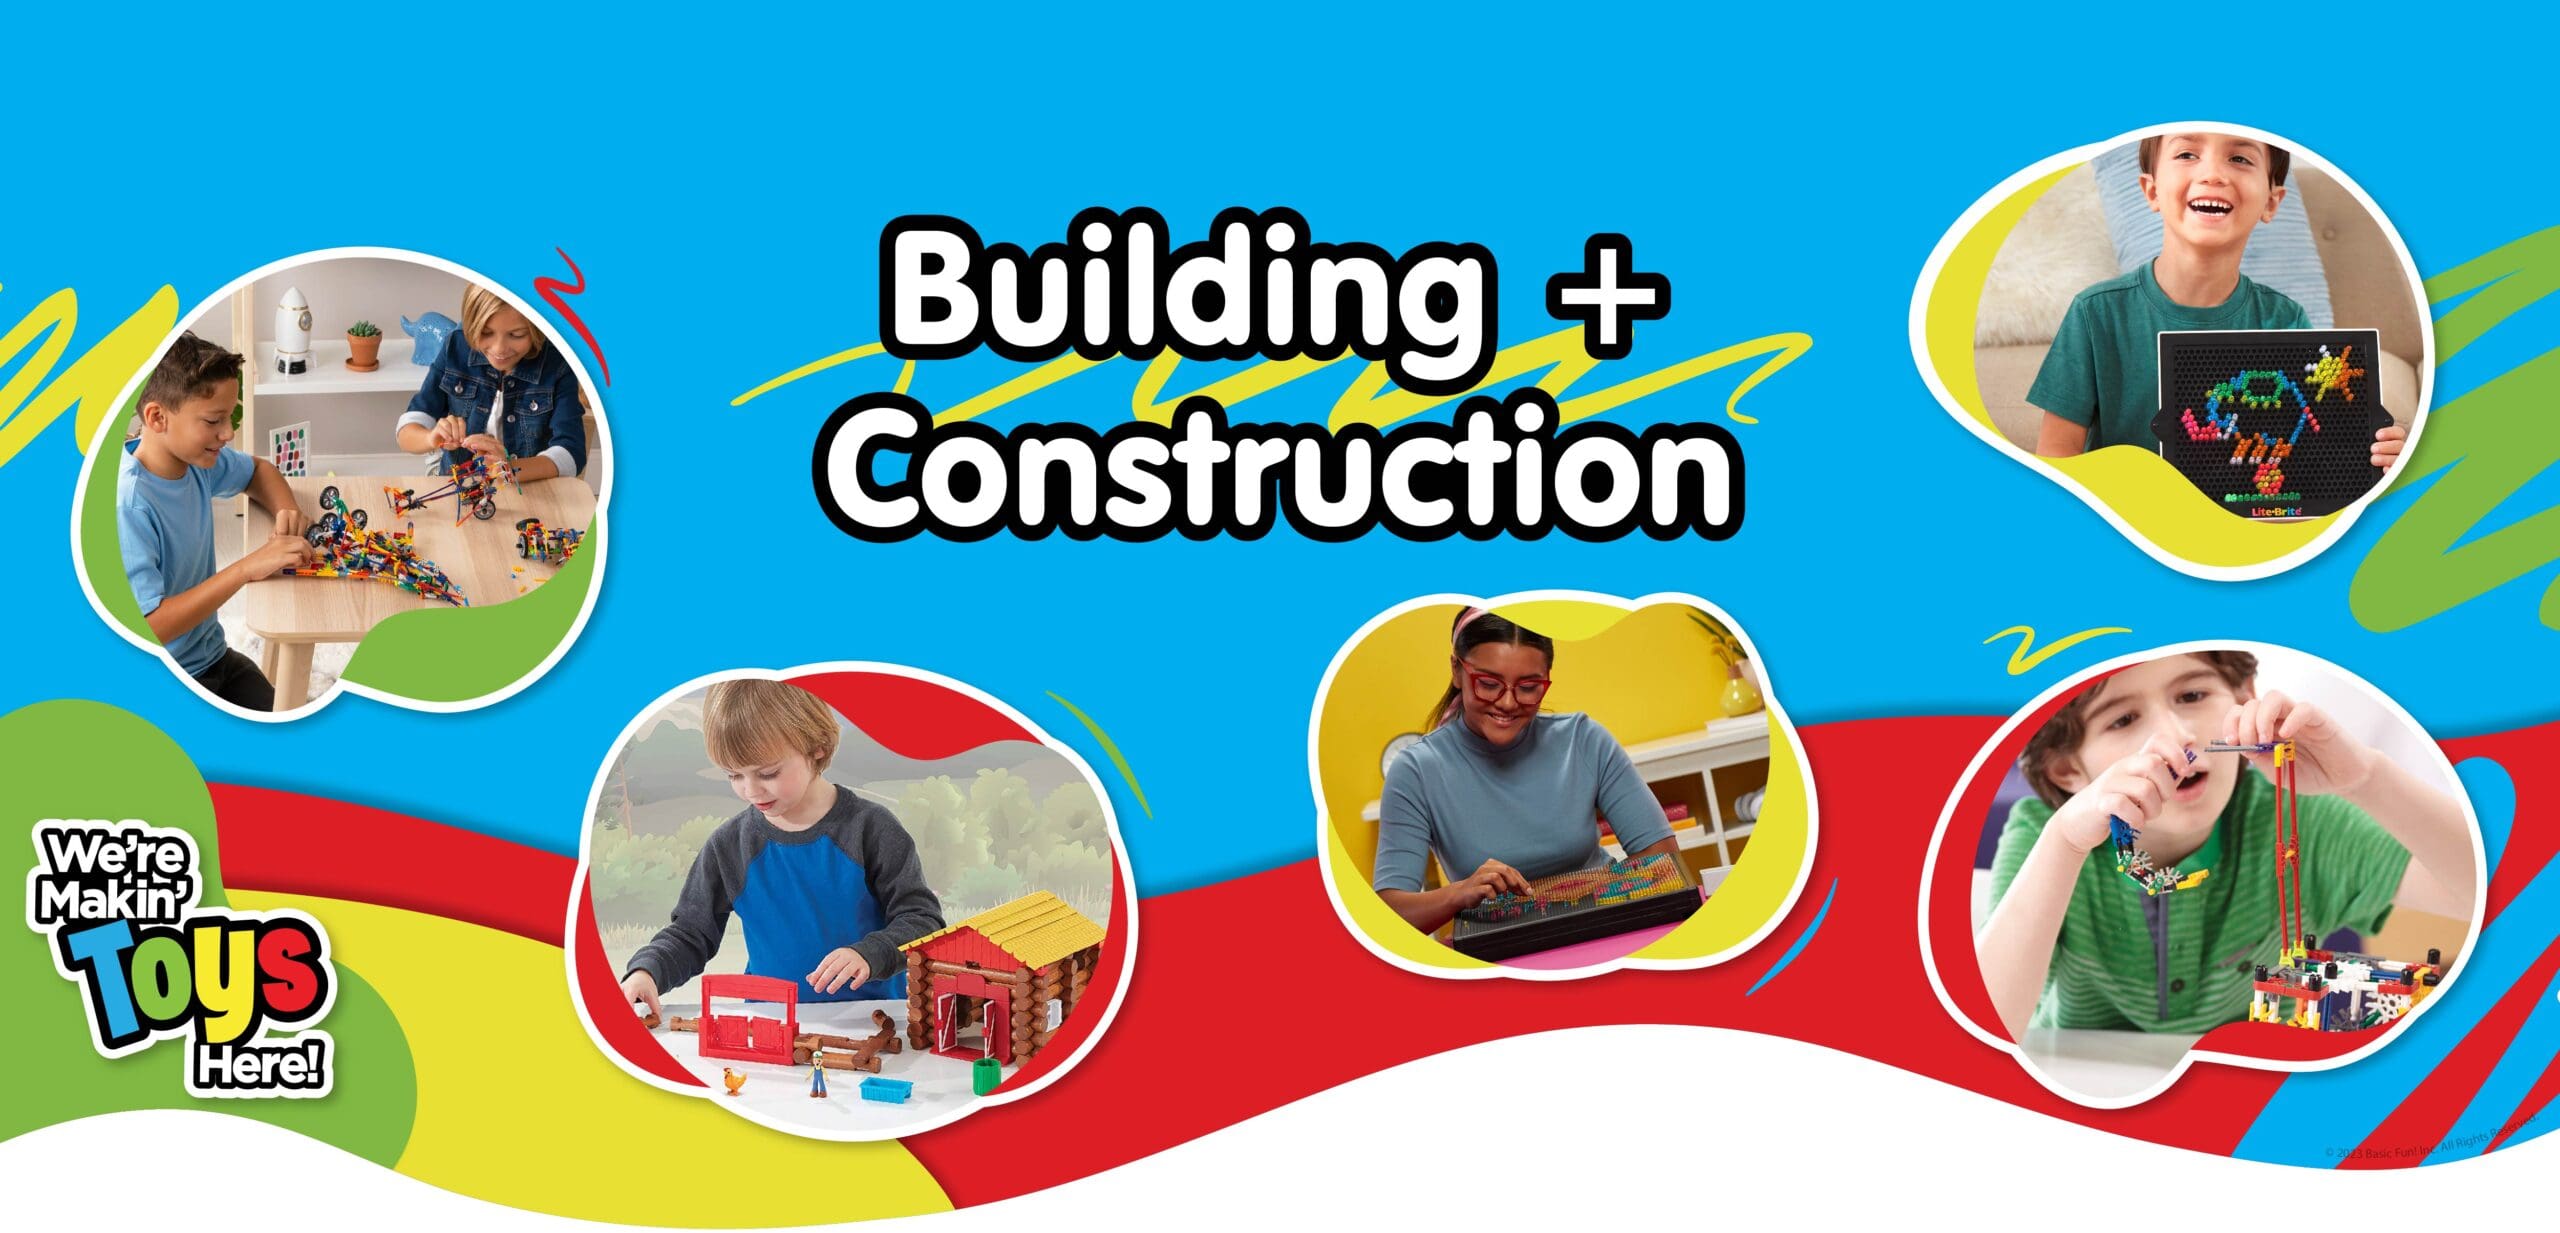 Building and Construction banner featuring kids playing with toys